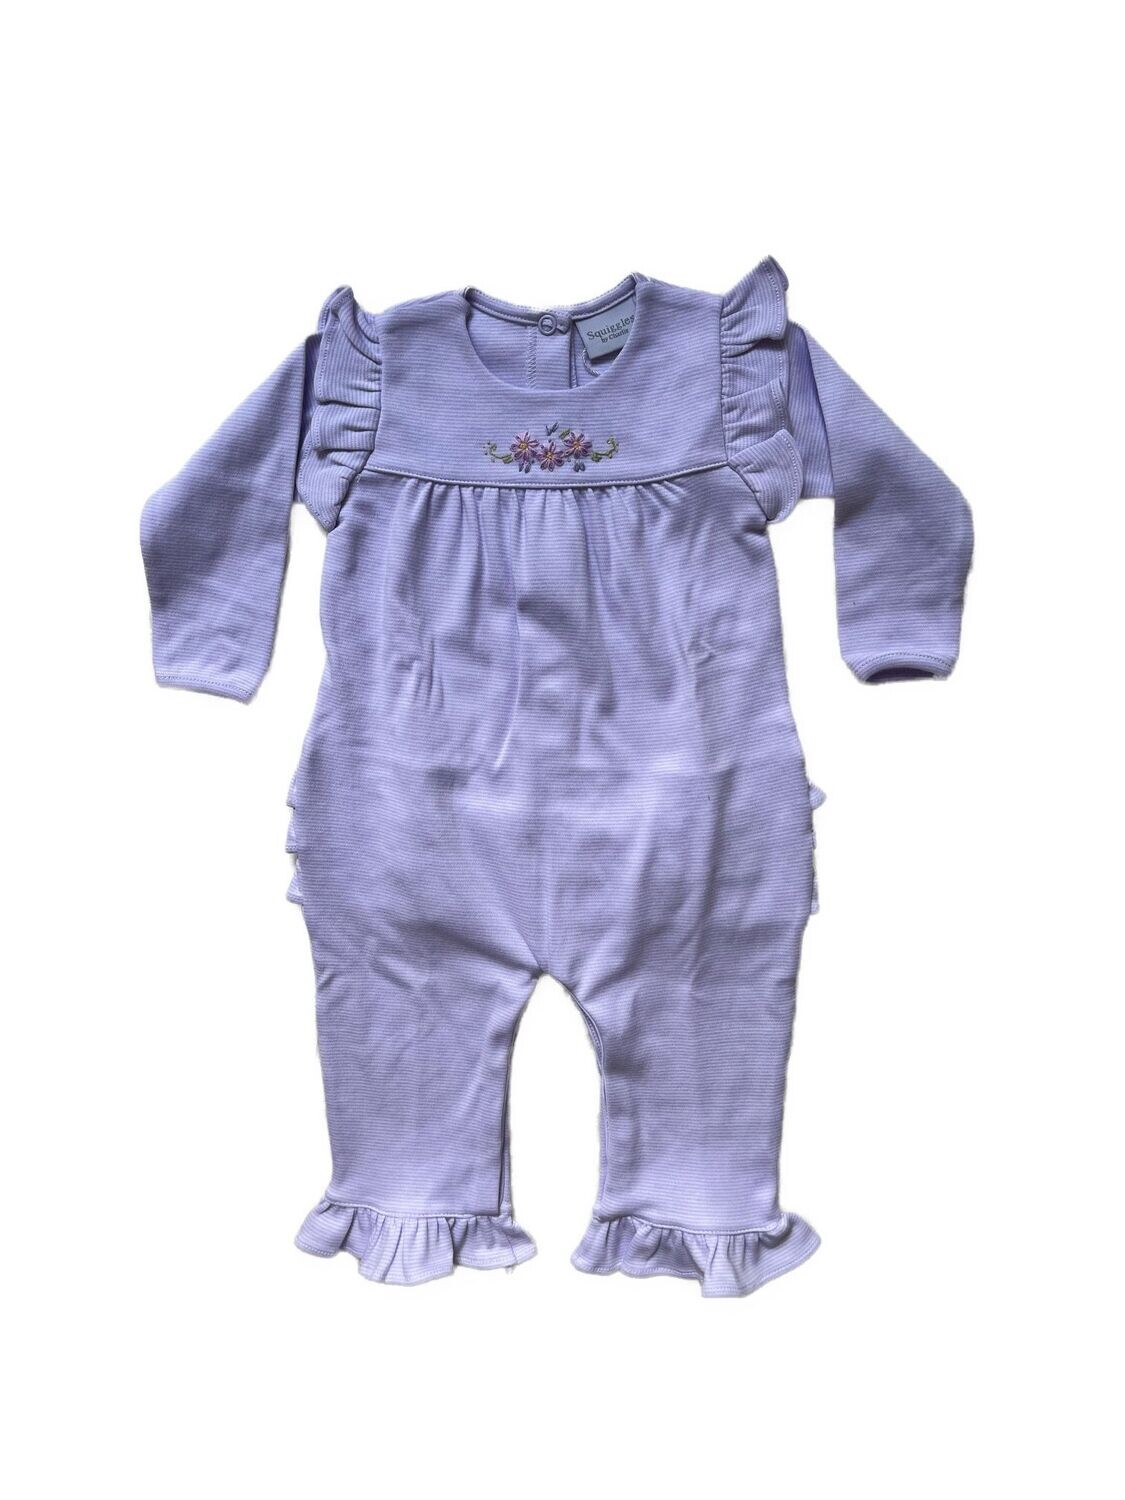 Lazy Daisy Coverall w/ Bow on Side, Size: 6-9m